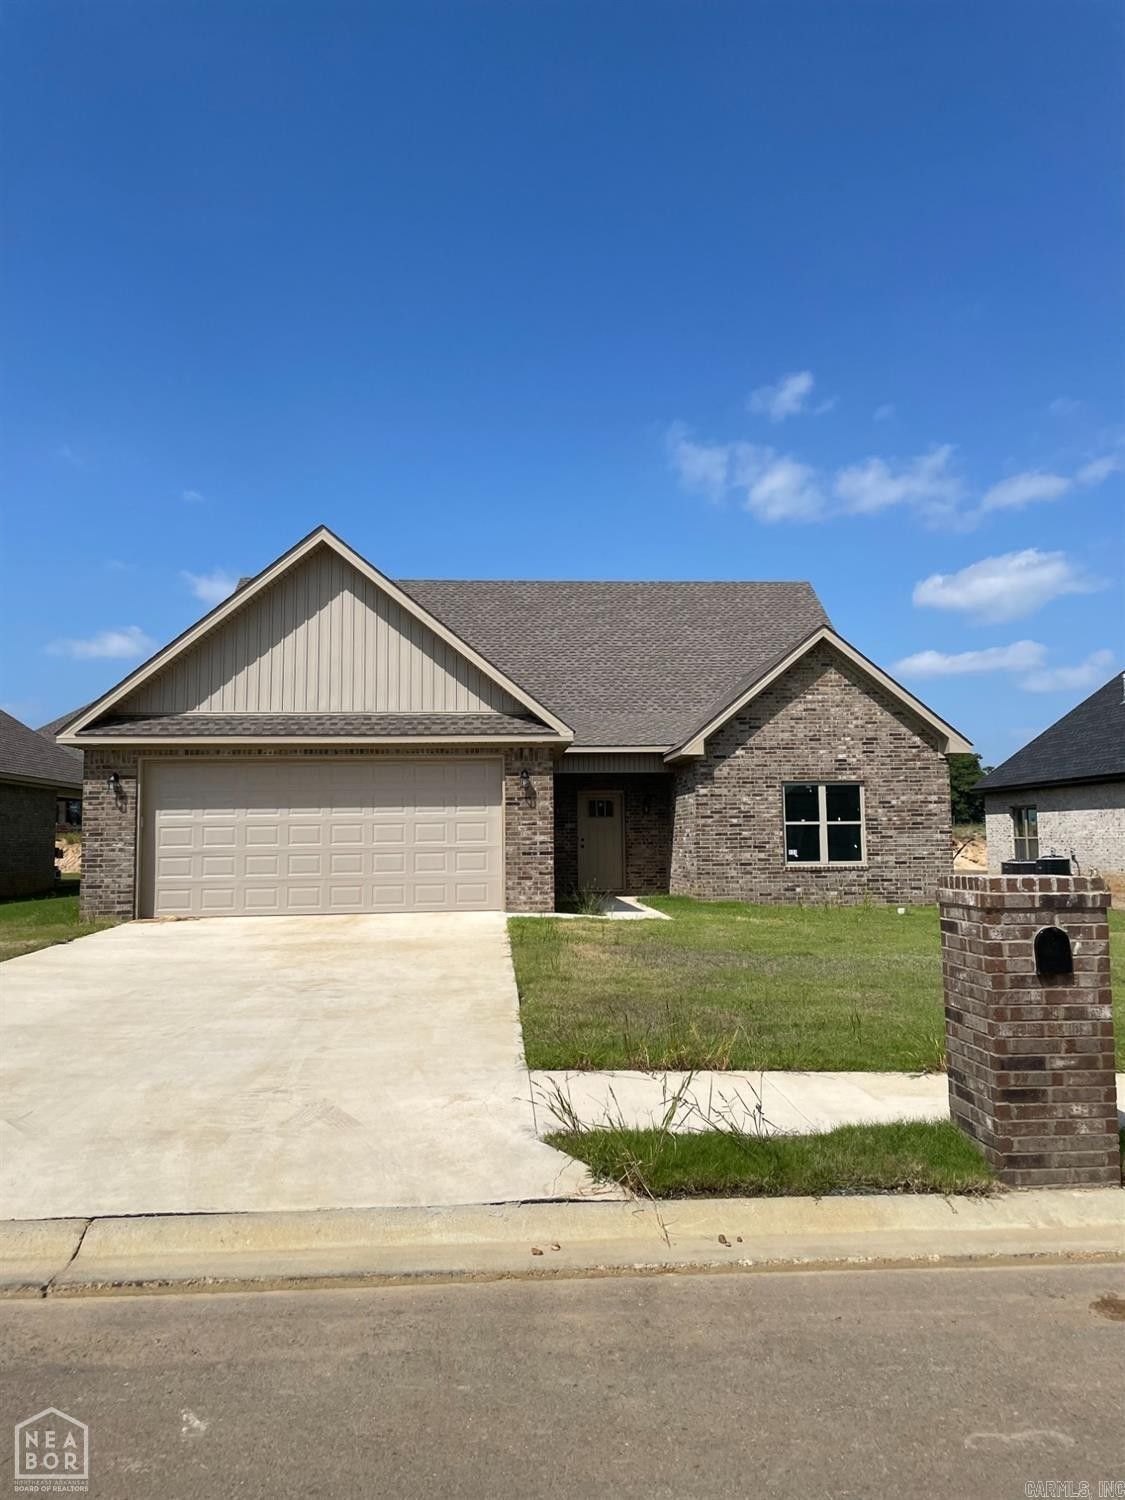 131 Clearwater Drive. Brookland, AR 72417